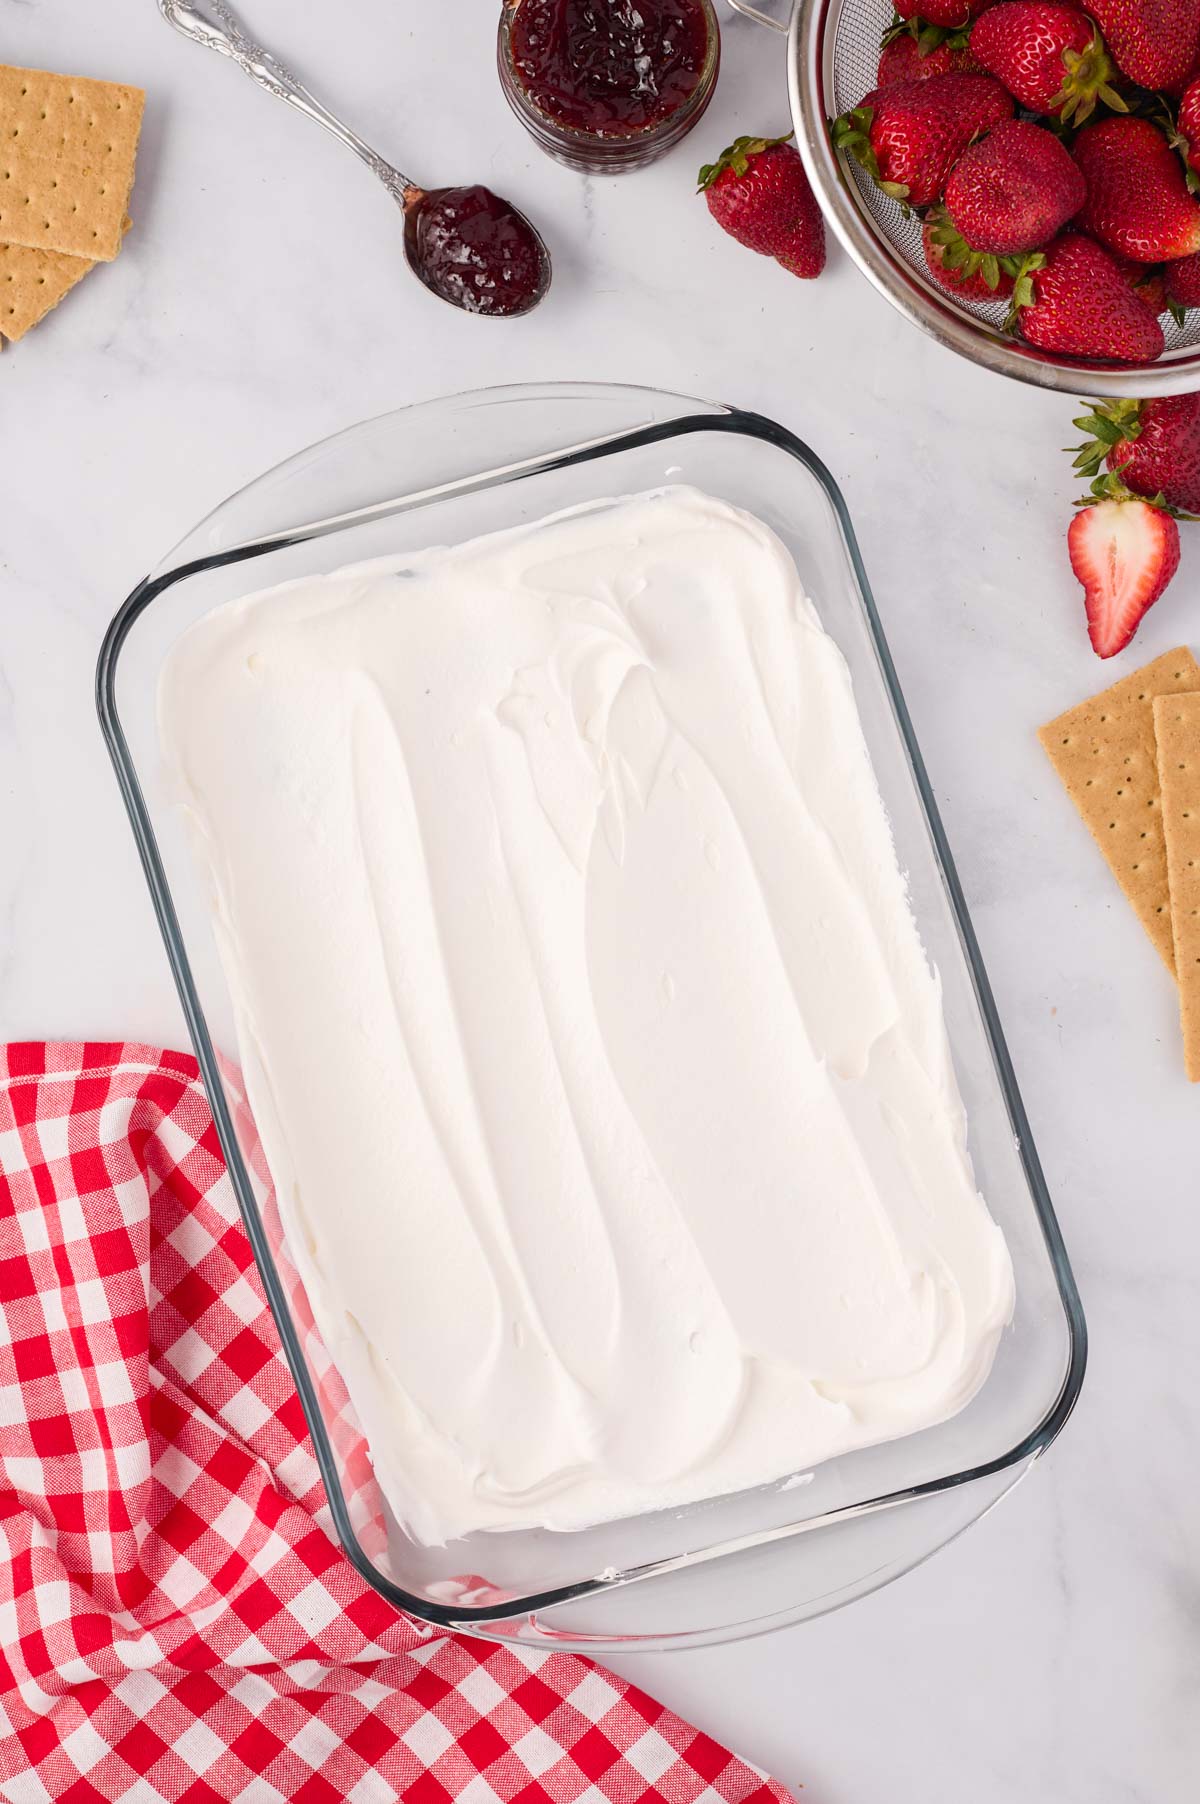 Layer of cool whip in a 9 x 13 baking dish